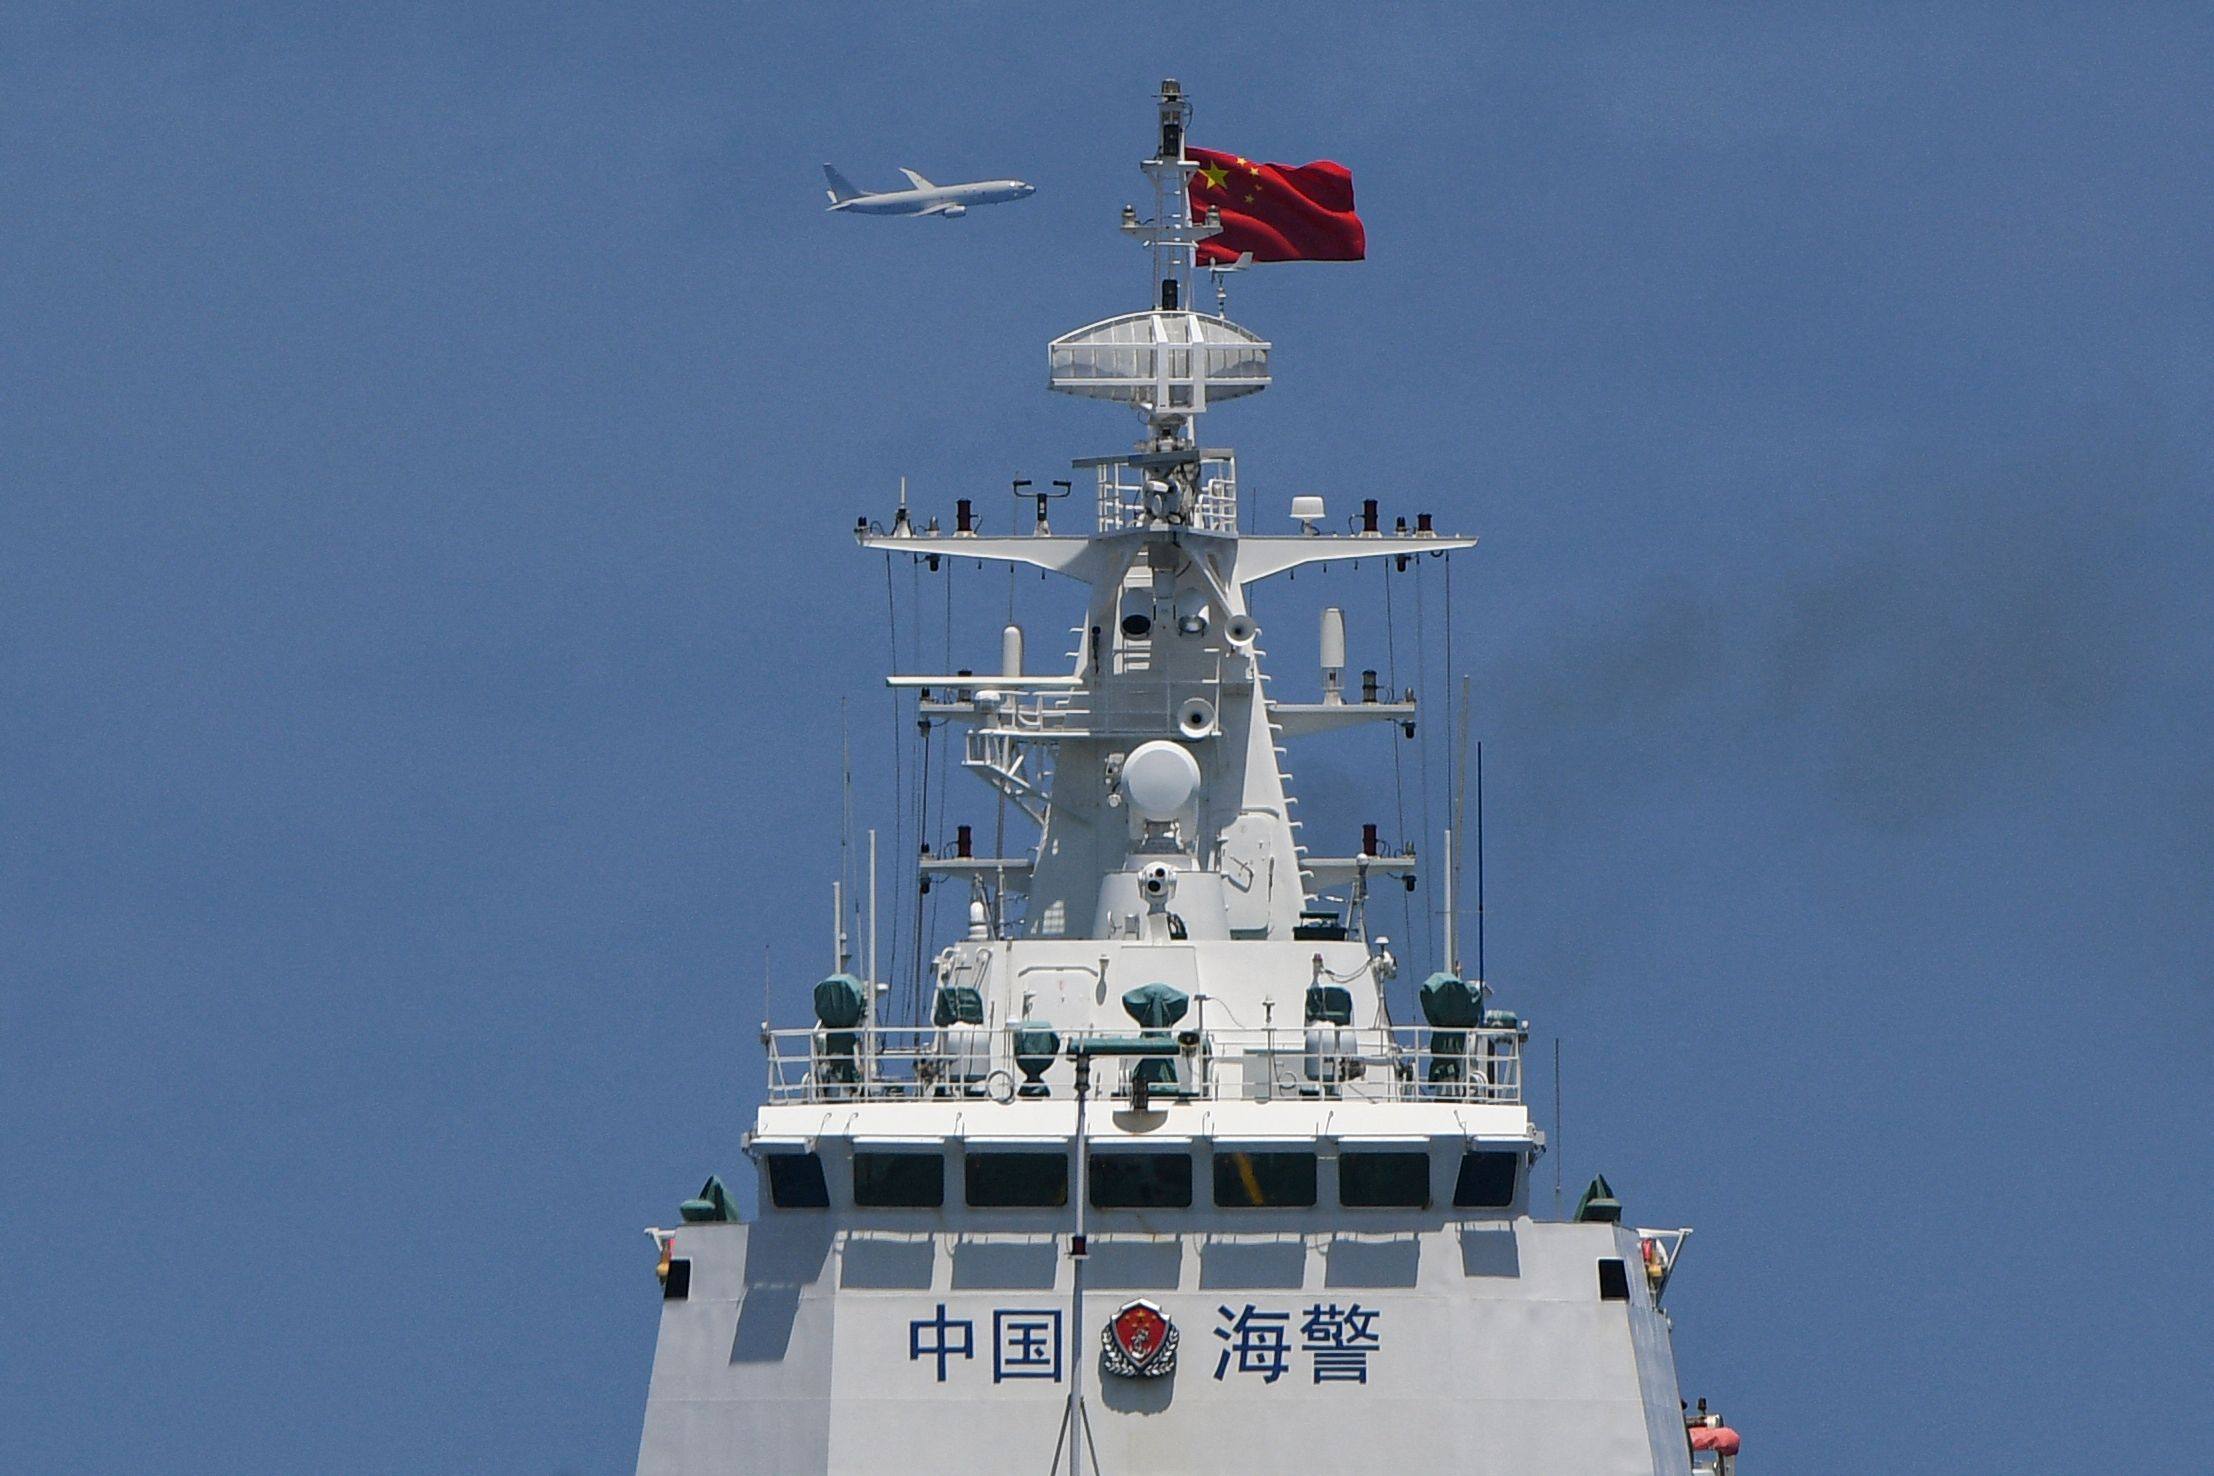 A P-8 Poseidon patrol and reconnaissance aircraft of the US Navy circles around a Chinese coastguard ship in the South China Sea earlier this month. Photo: AFP